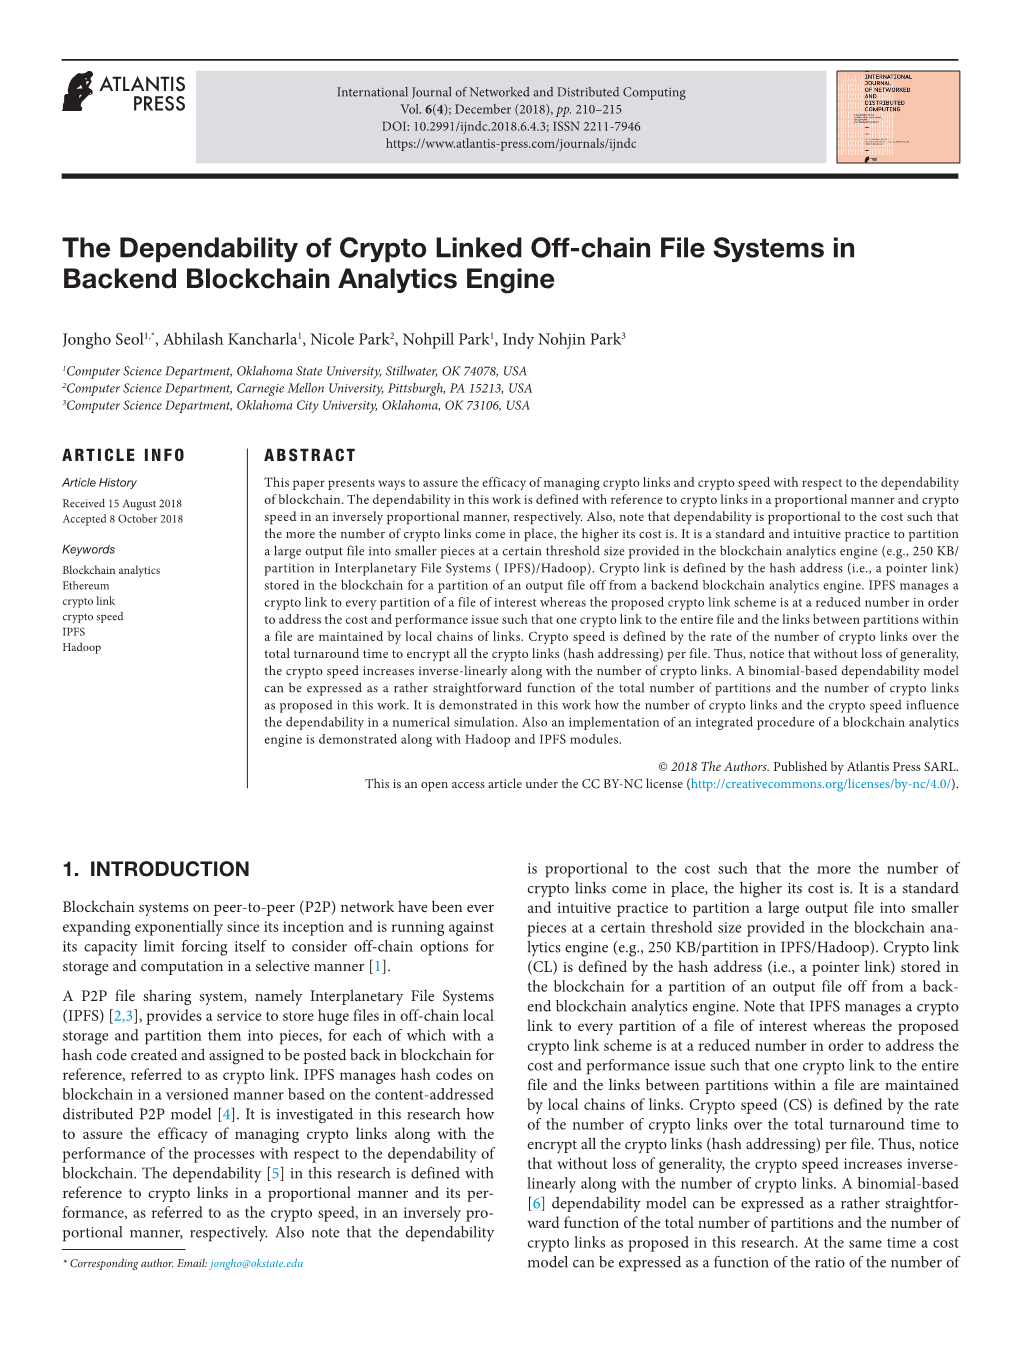 The Dependability of Crypto Linked Off-Chain File Systems in Backend Blockchain Analytics Engine